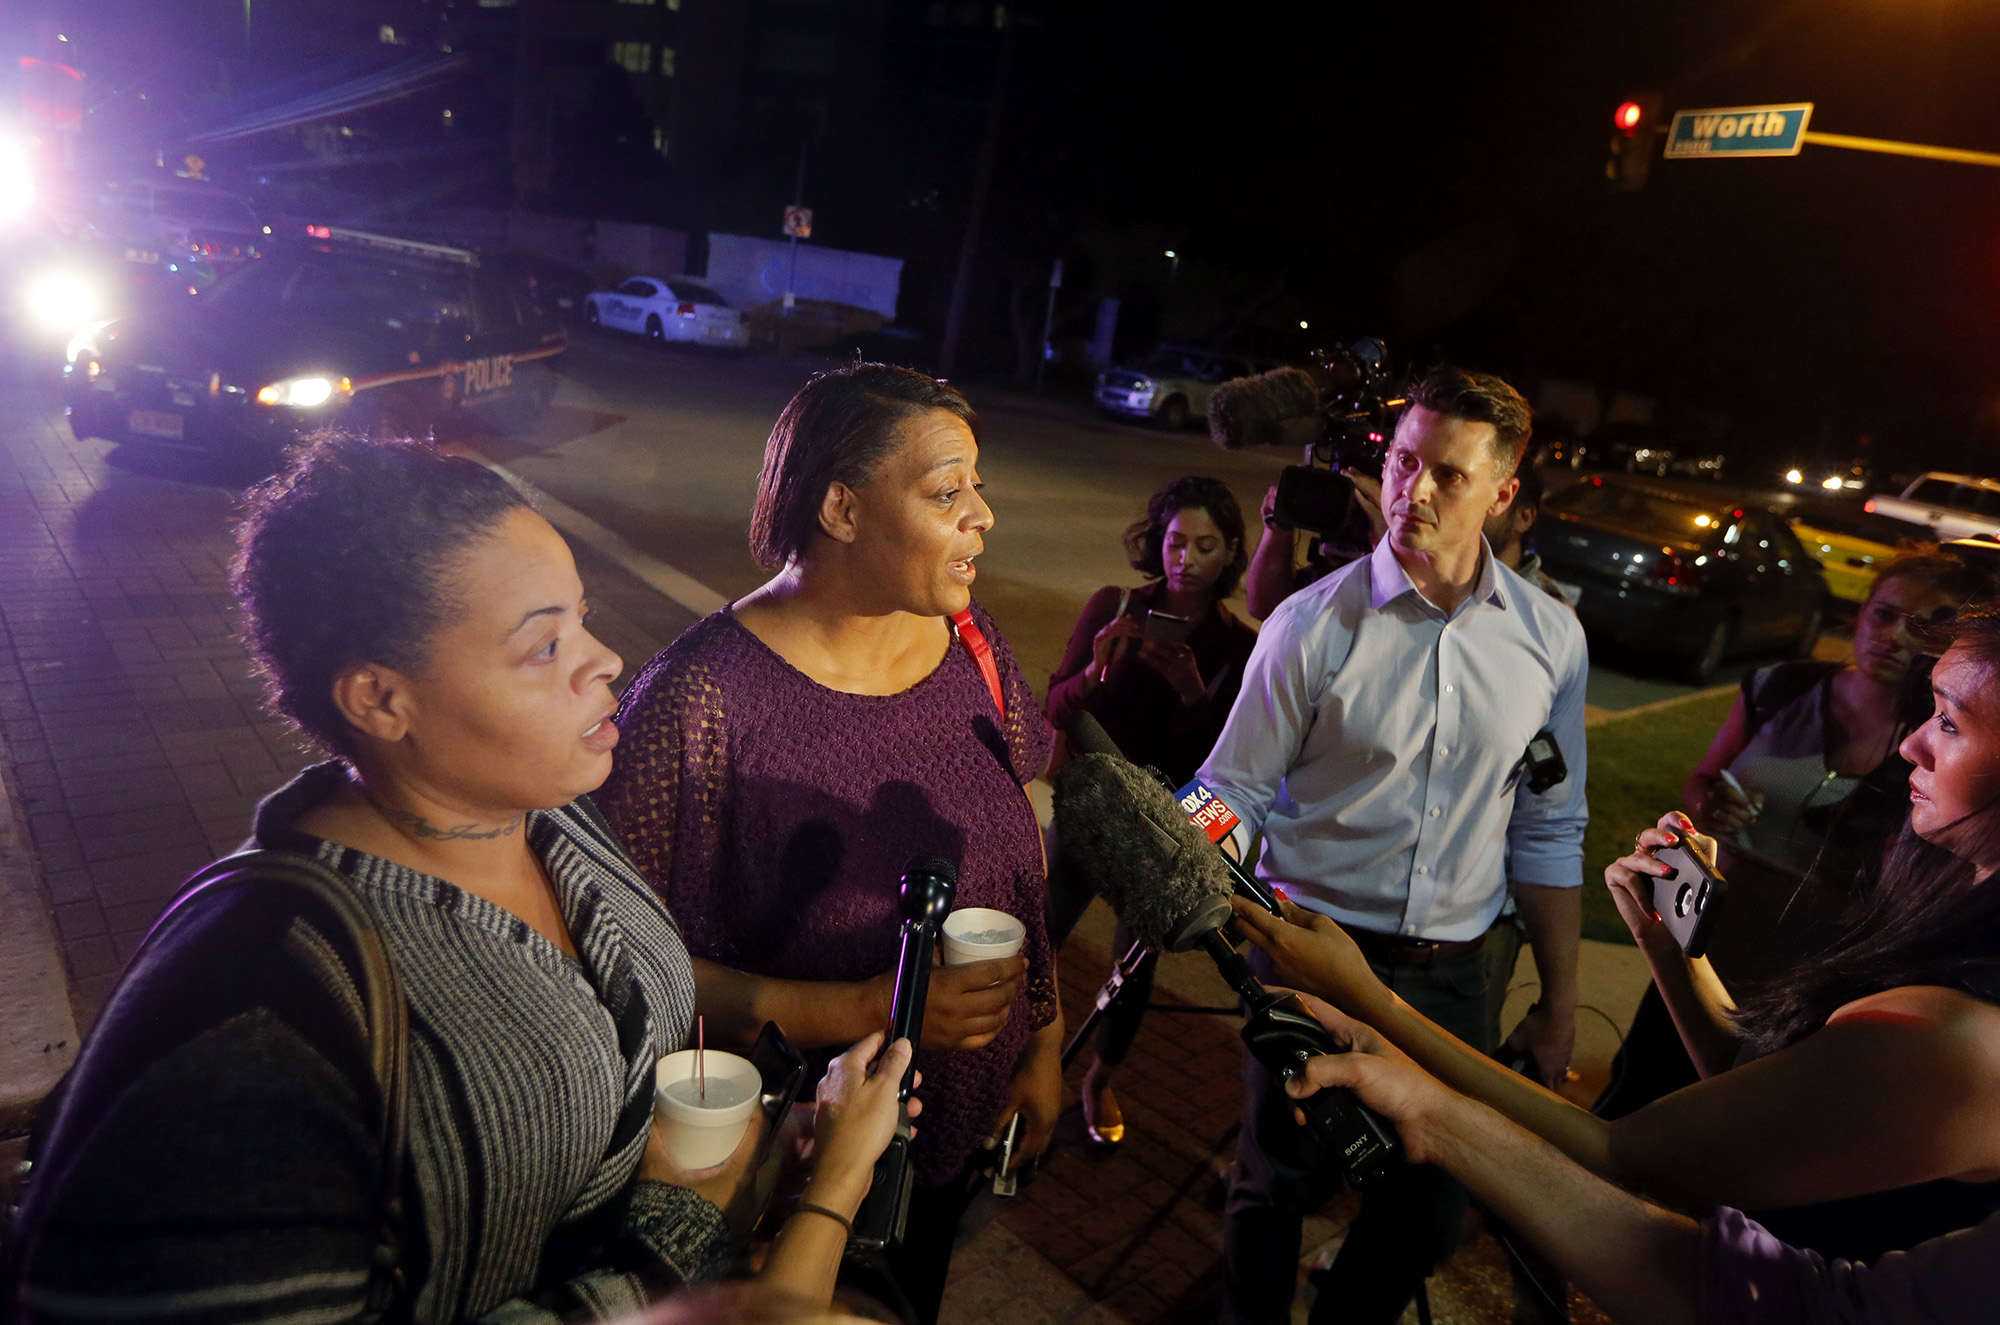 PHOTO: Sherie Williams, left, and Theresa Williams, center, speak to reporters outside Baylor University Medical Center, Friday, July 8, 2016, in Dallas, Texas. Theresa Williams said her sister Shetamia Taylor, was shot in the leg.